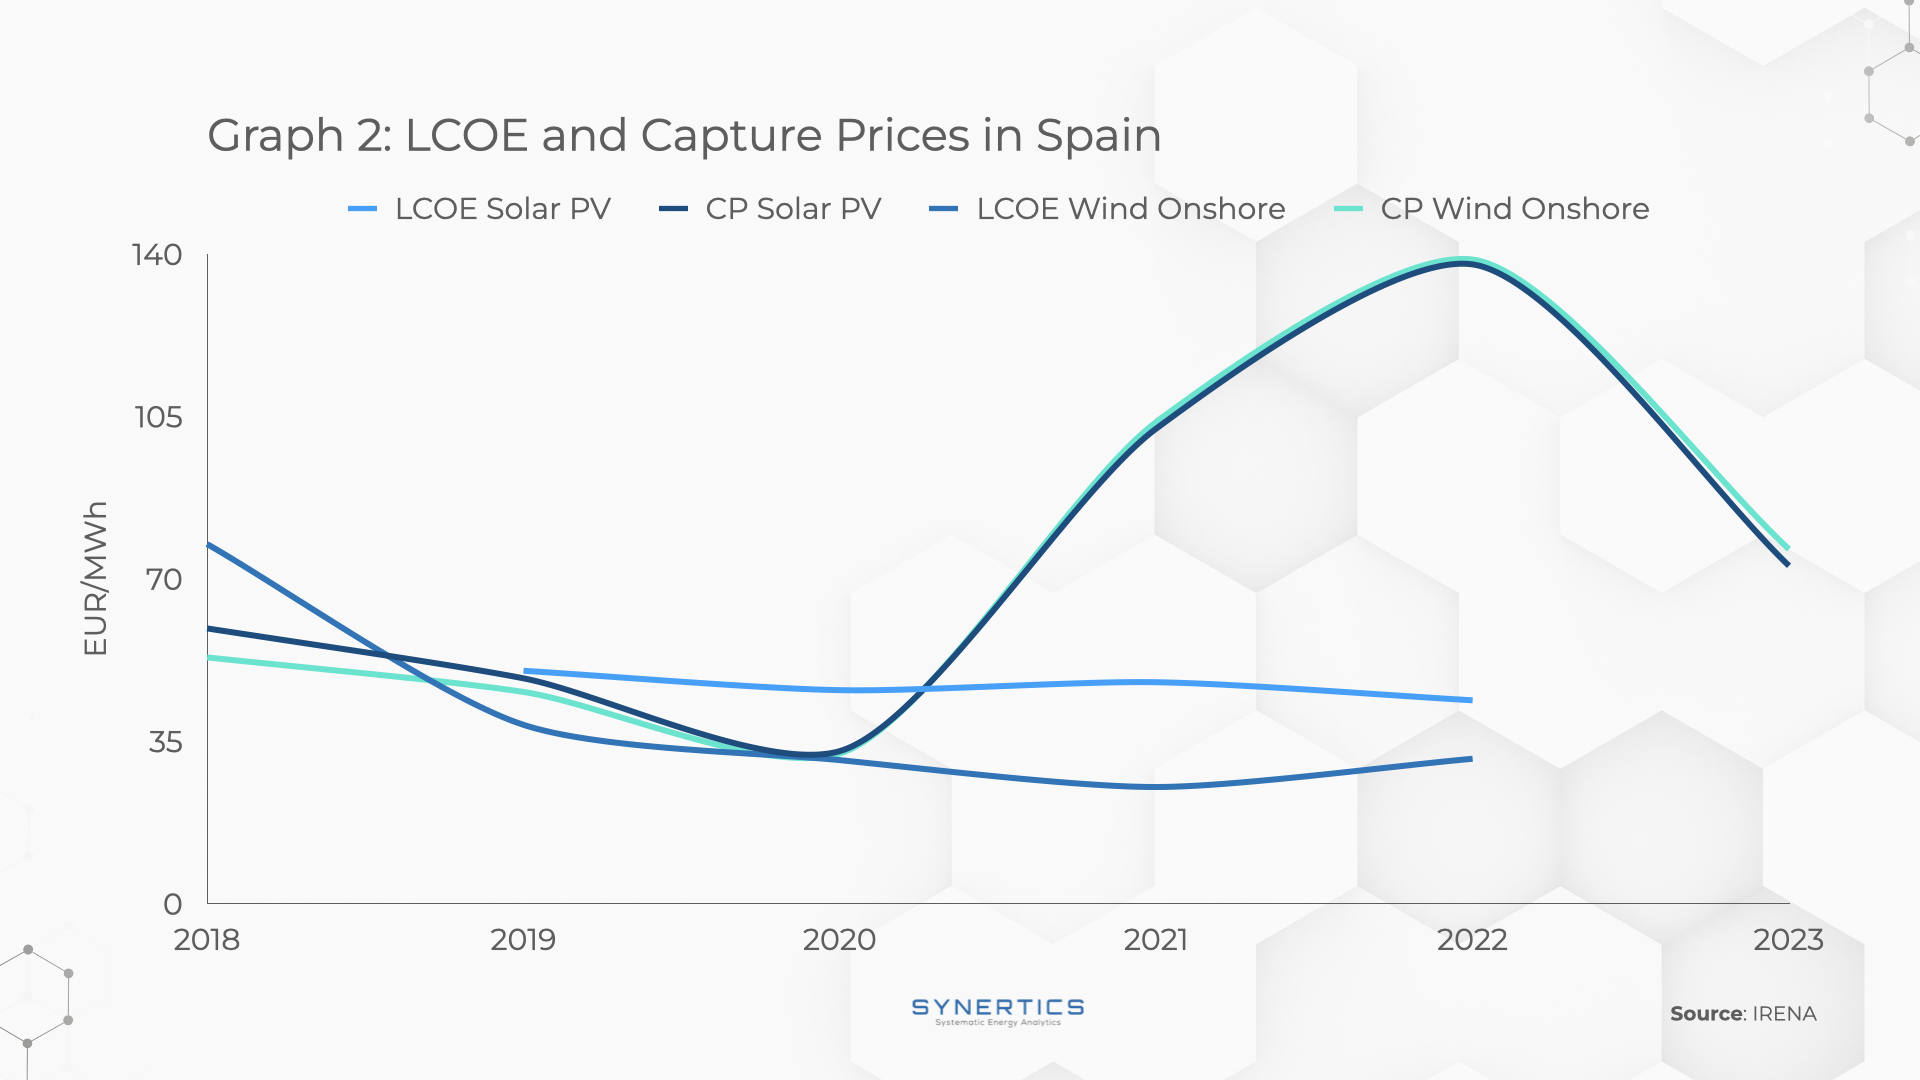 LCOE and Capture Prices in Spain